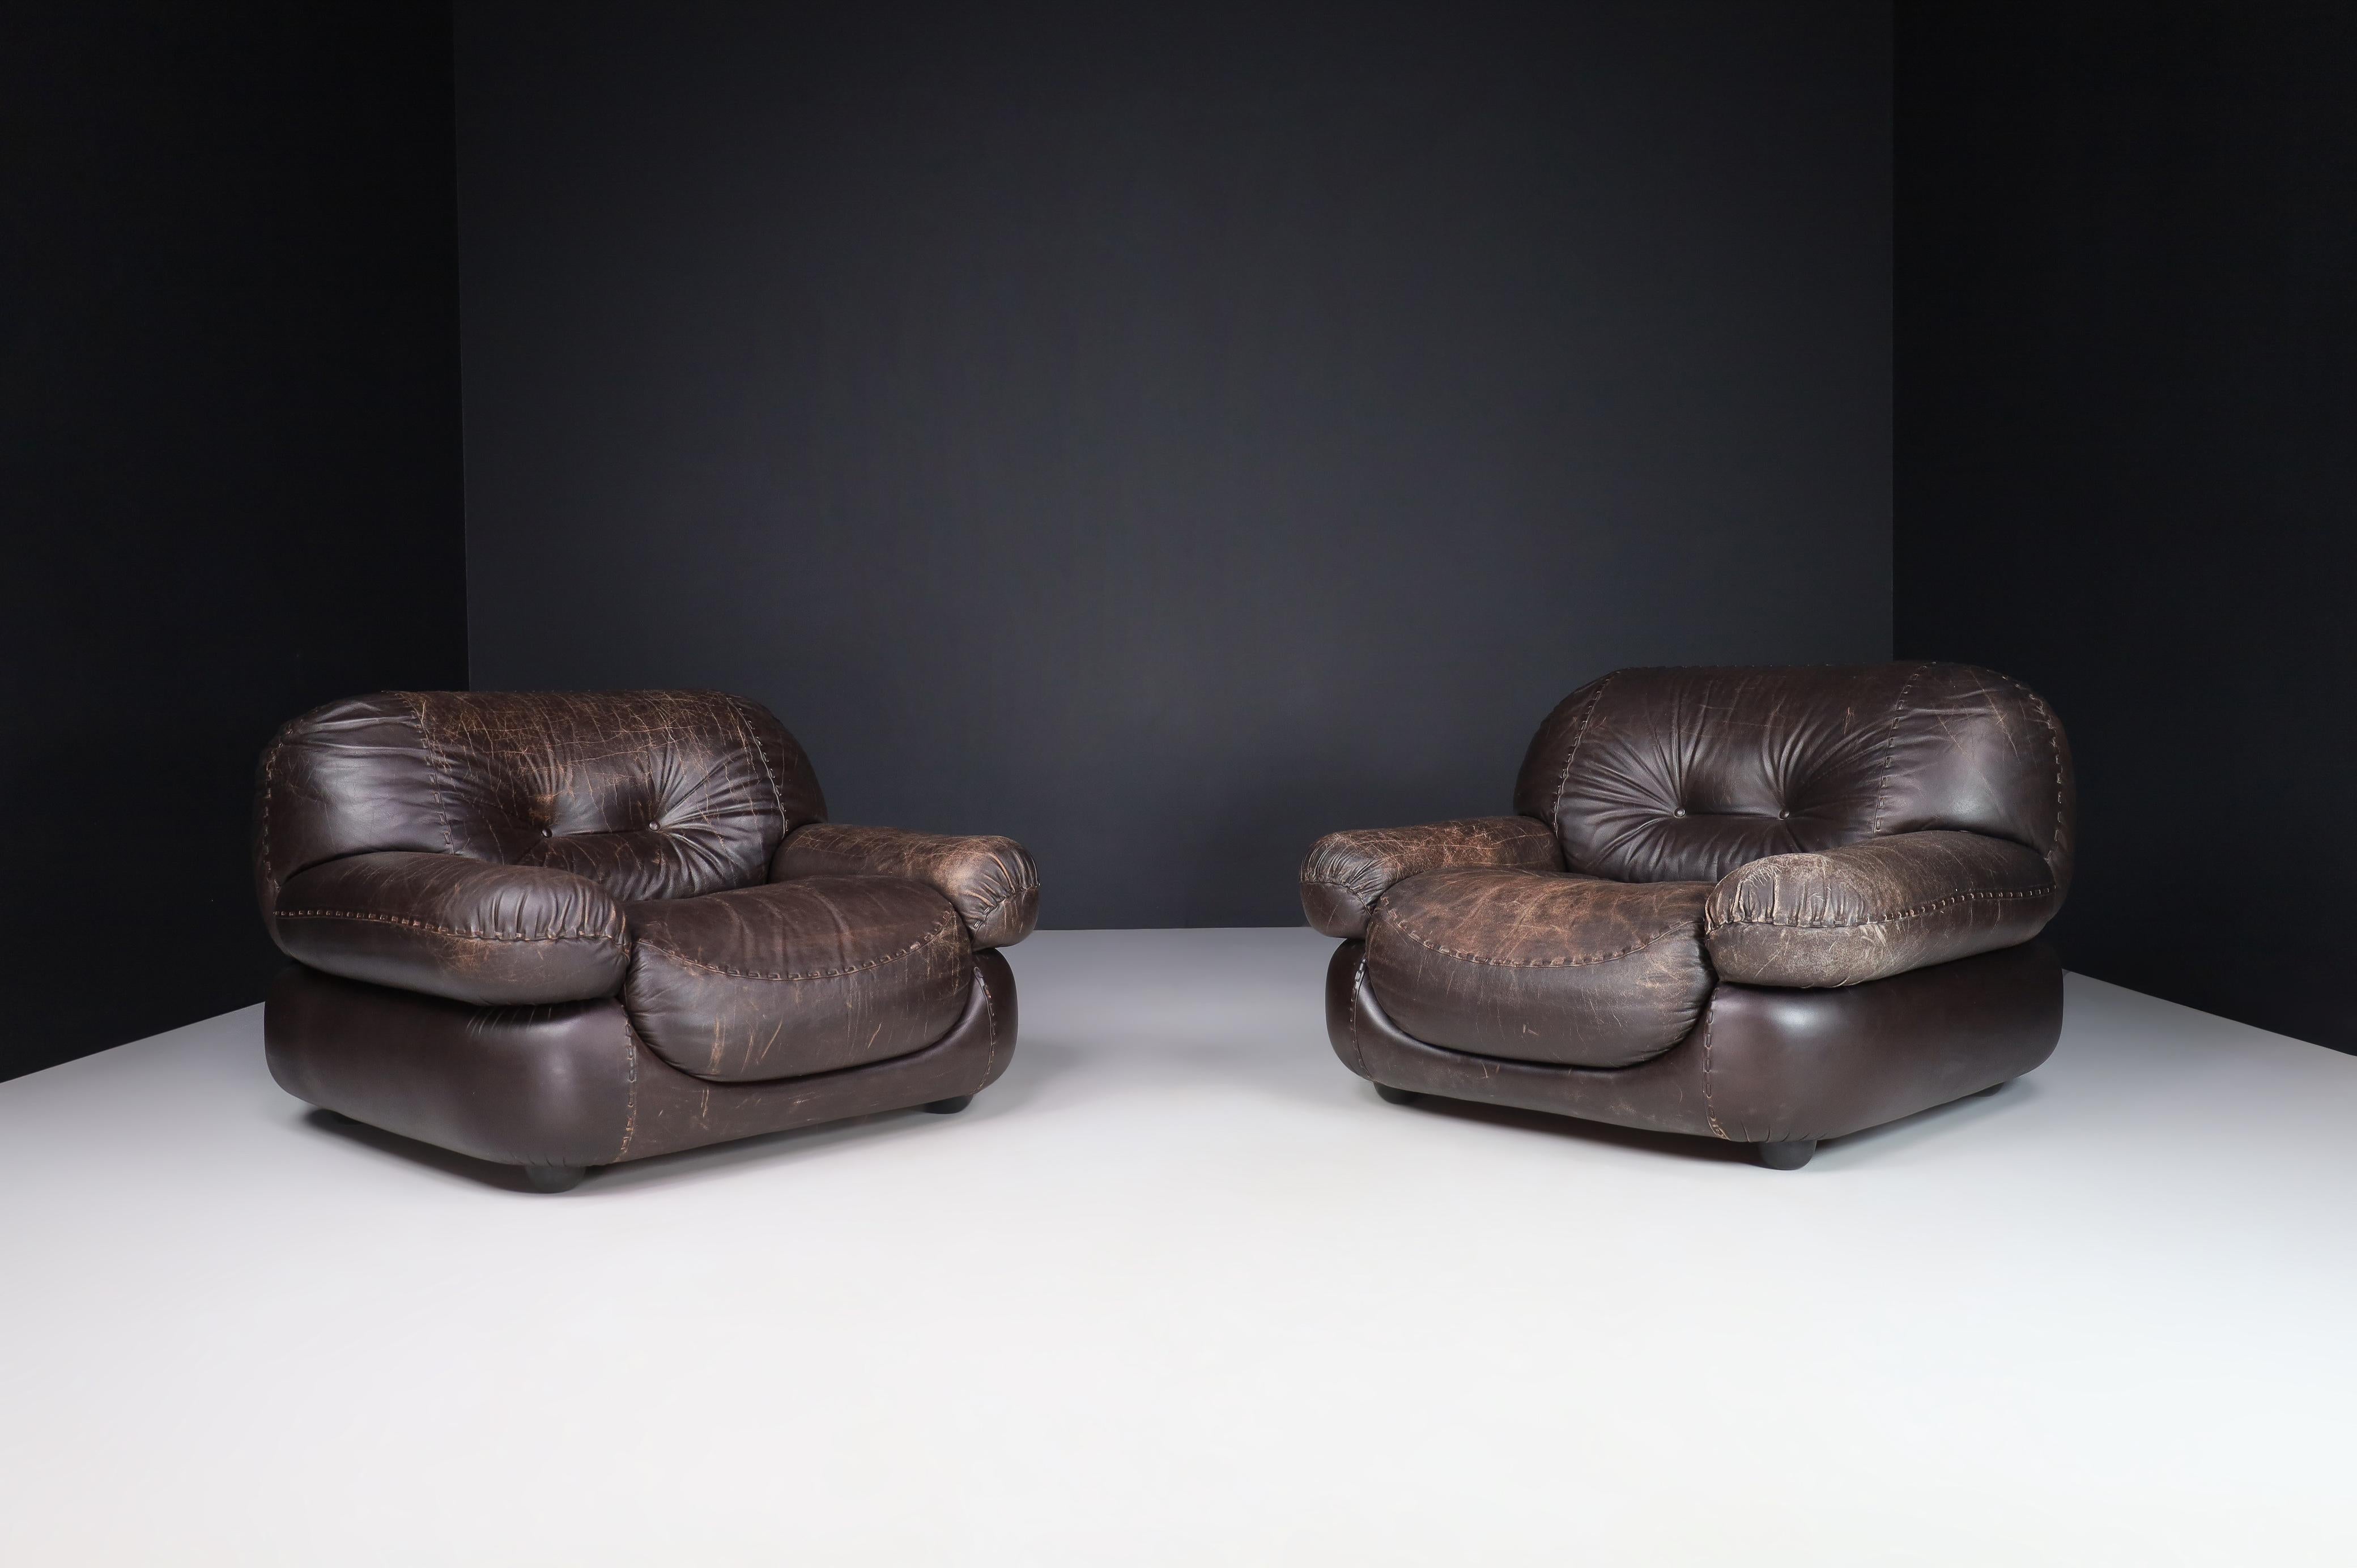 A couple of Lounge chairs in Patinated Brown Leather by Sapporo for Mobil Girgi, Italy 1970

A pair of lounge chairs in Patinated brown leather by Sapporo for Mobil Girgi, Italy, in the 1970s. A couple of big, fluffy, stylish lounge armchairs that